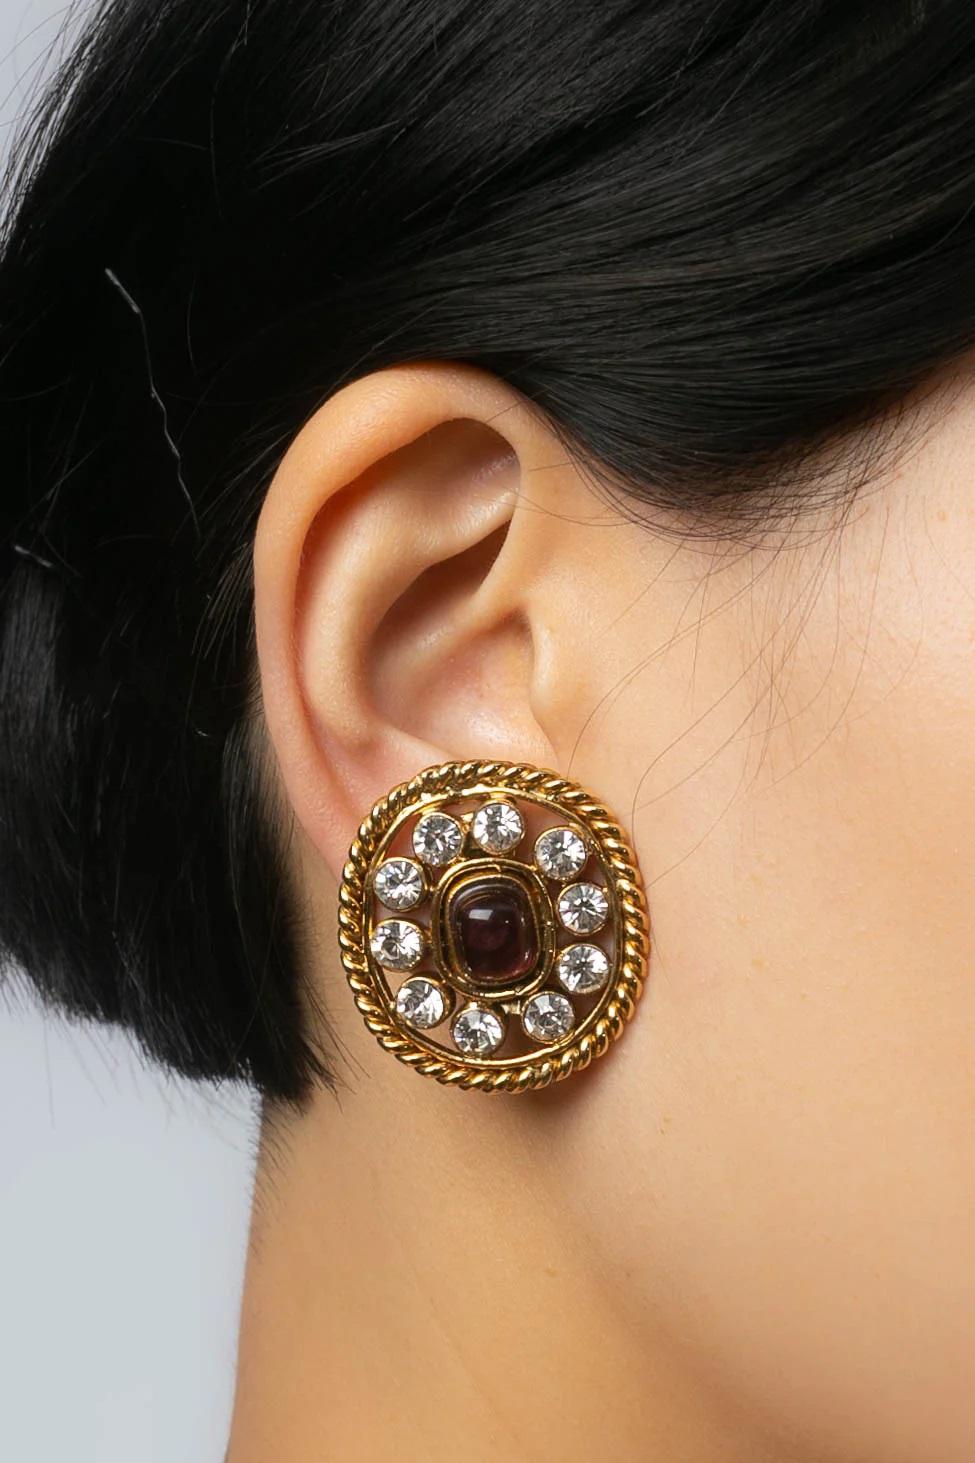 Chanel- (Made in France) Clip on penwork gilded metal earrings decorated with rhinestones and a glass paste cabochon. 
2cc3 Collection.

Additional information:

Dimensions: 
3.1 W x 3.5 H cm (1.22